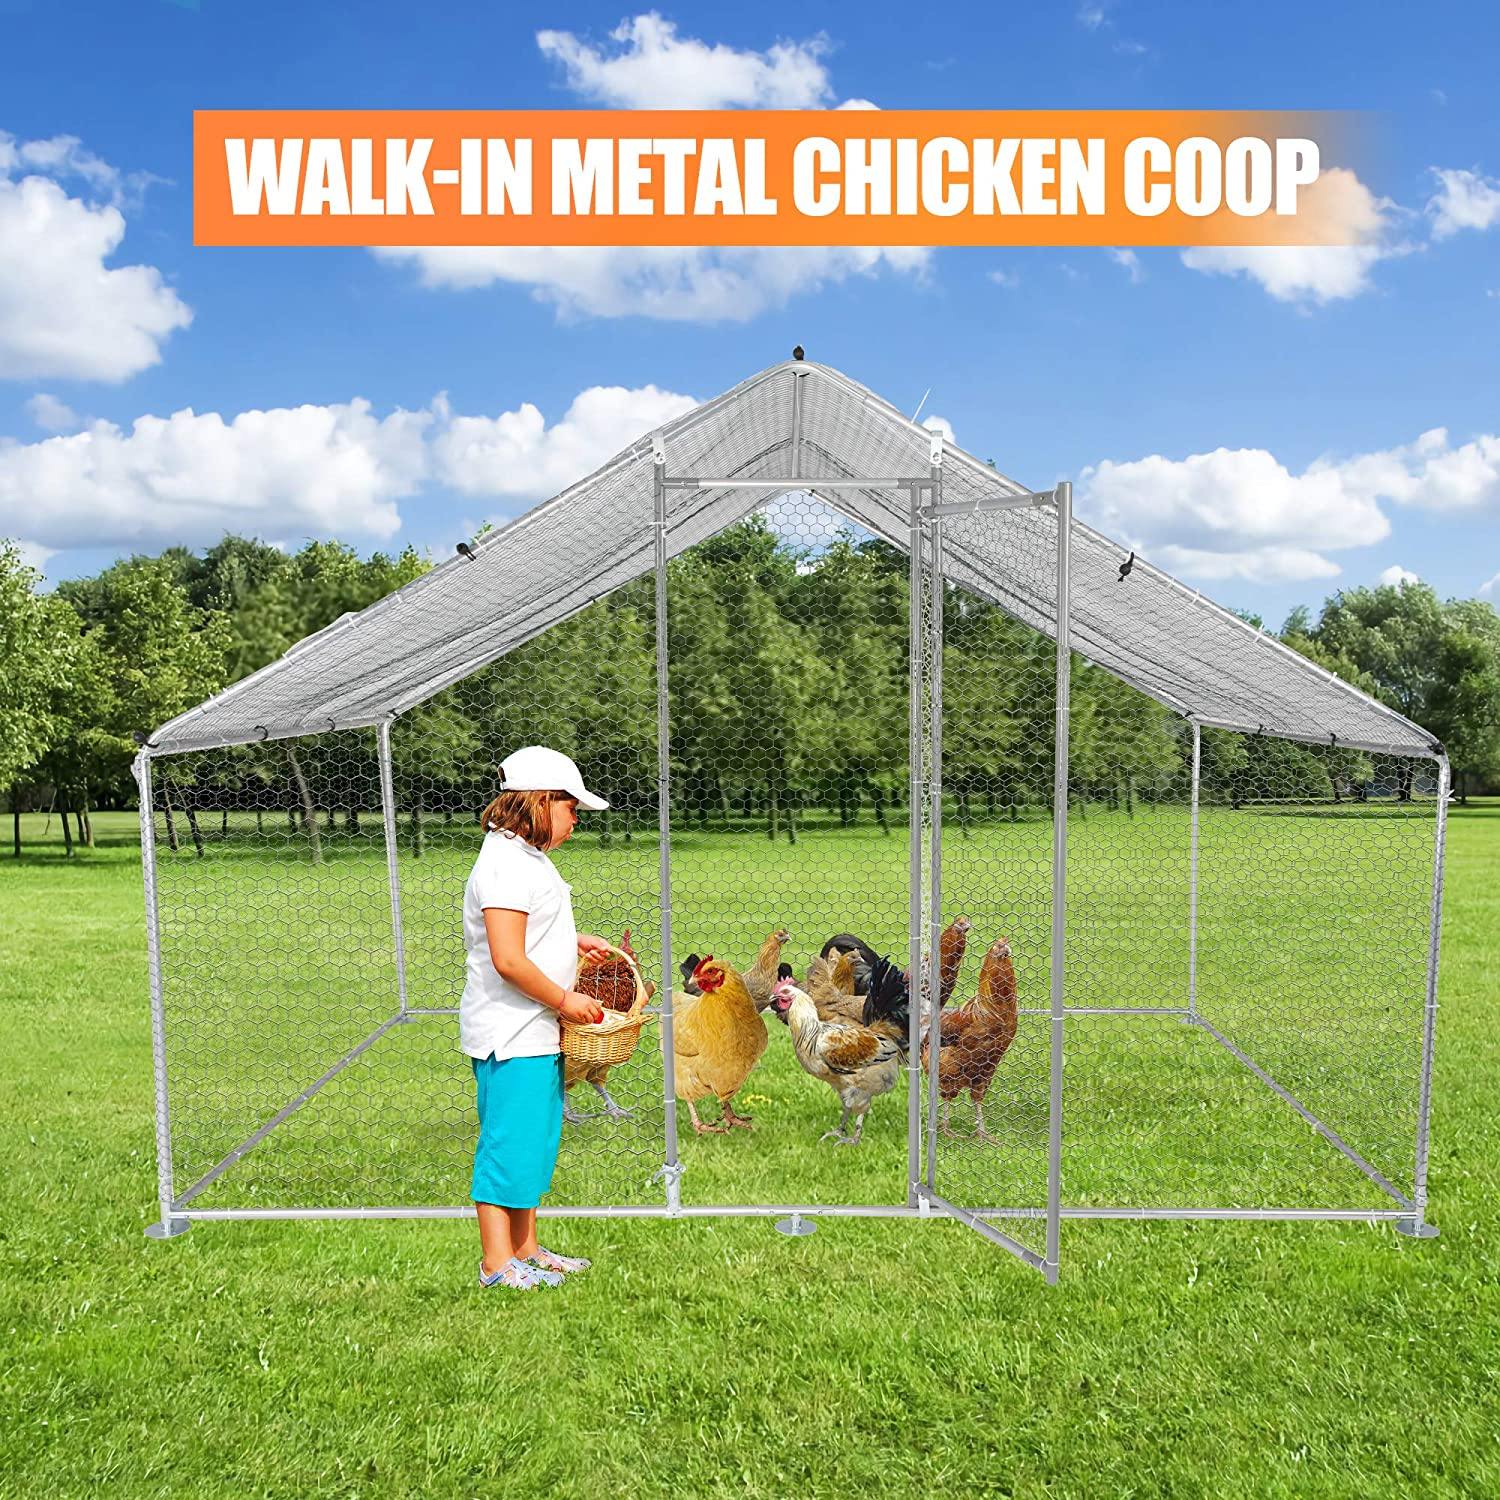 Outdoor Metal Chicken Coop Large Walk-in Poultry Cage Backyard Hen House with Chicken Run Cover for Farm Home Use 10x6.5x6.5ft - Bosonshop